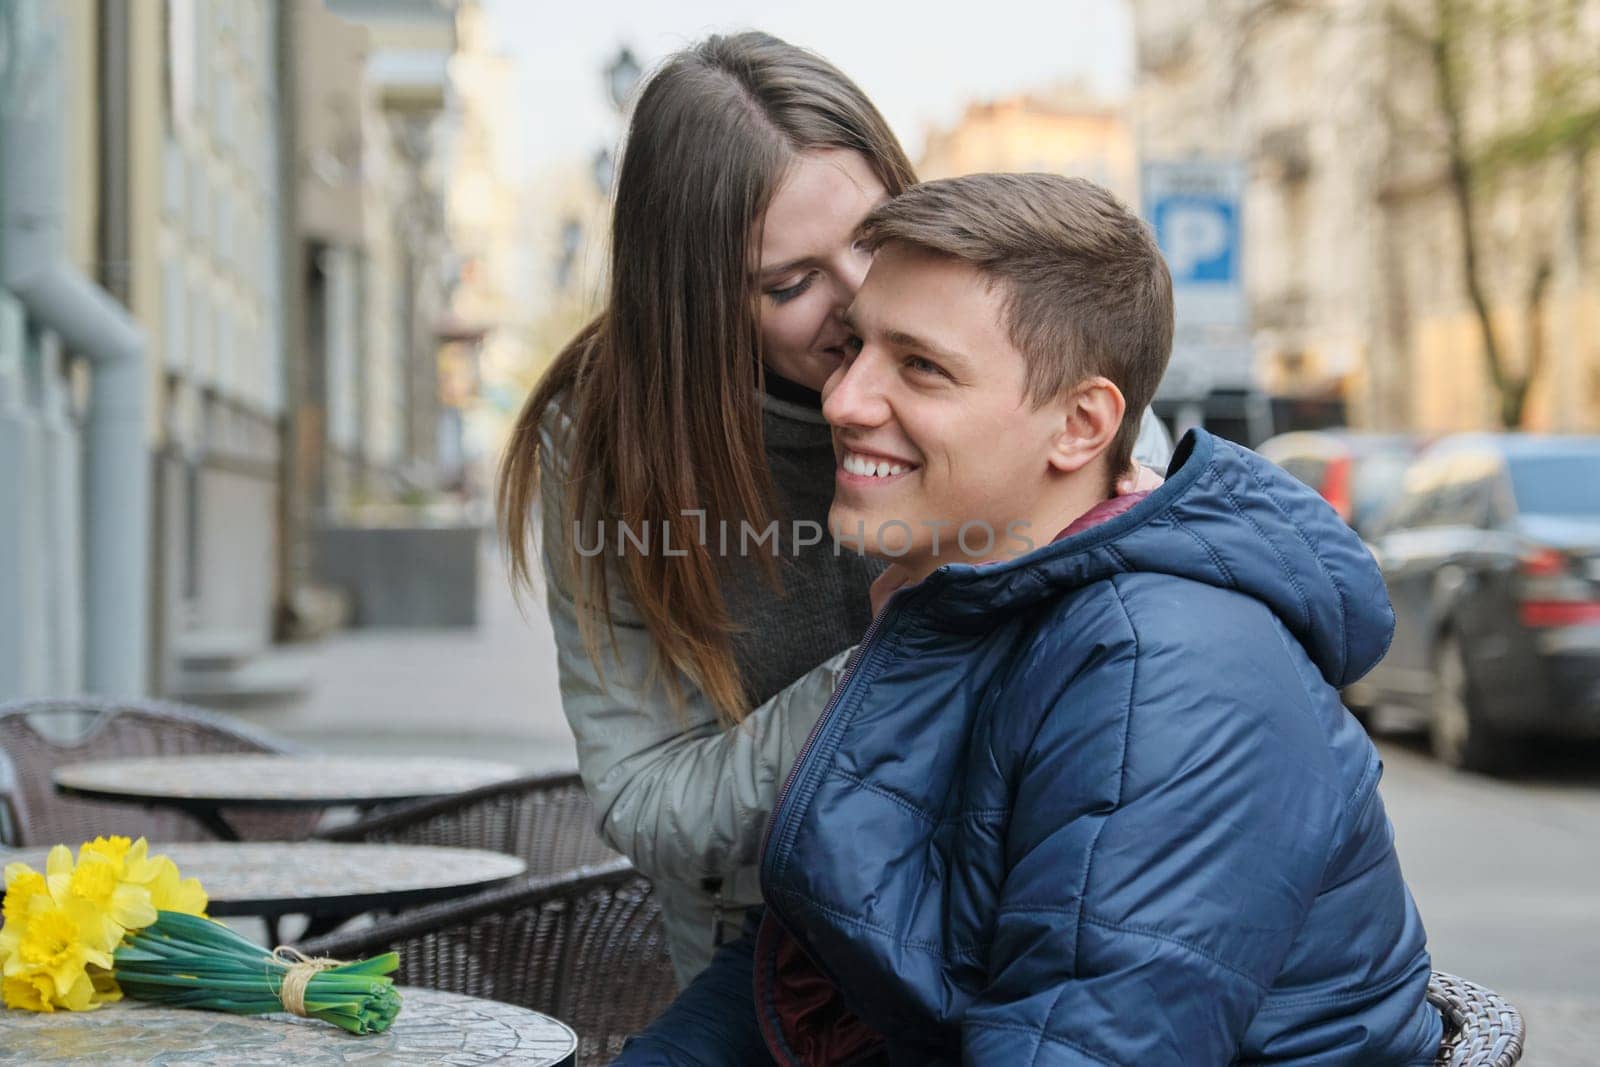 Couple in love in city. Young happy man and woman in spring city talking, walking, with bouquet of yellow flowers daffodils.